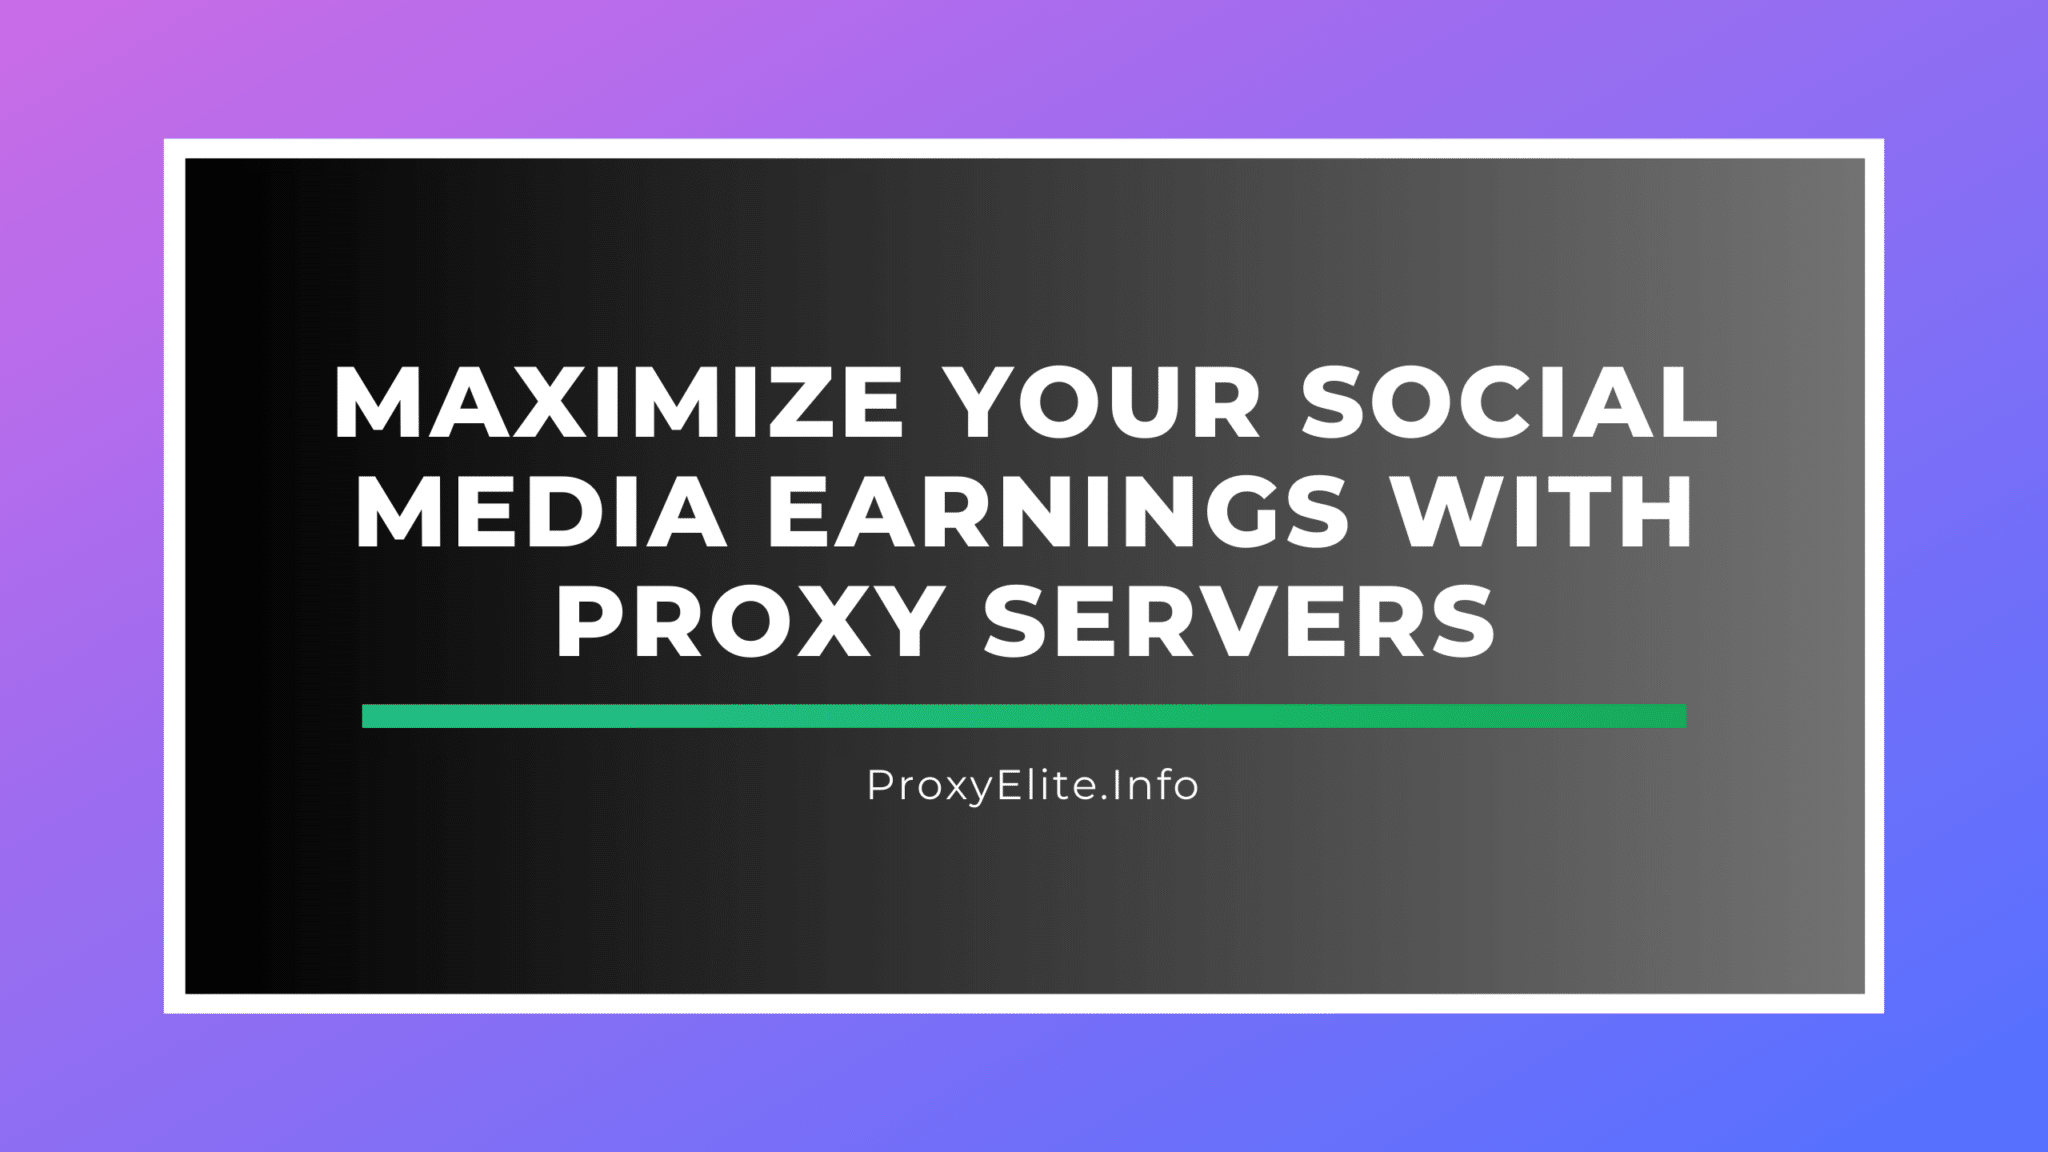 Maximize Your Social Media Earnings with Proxy Servers